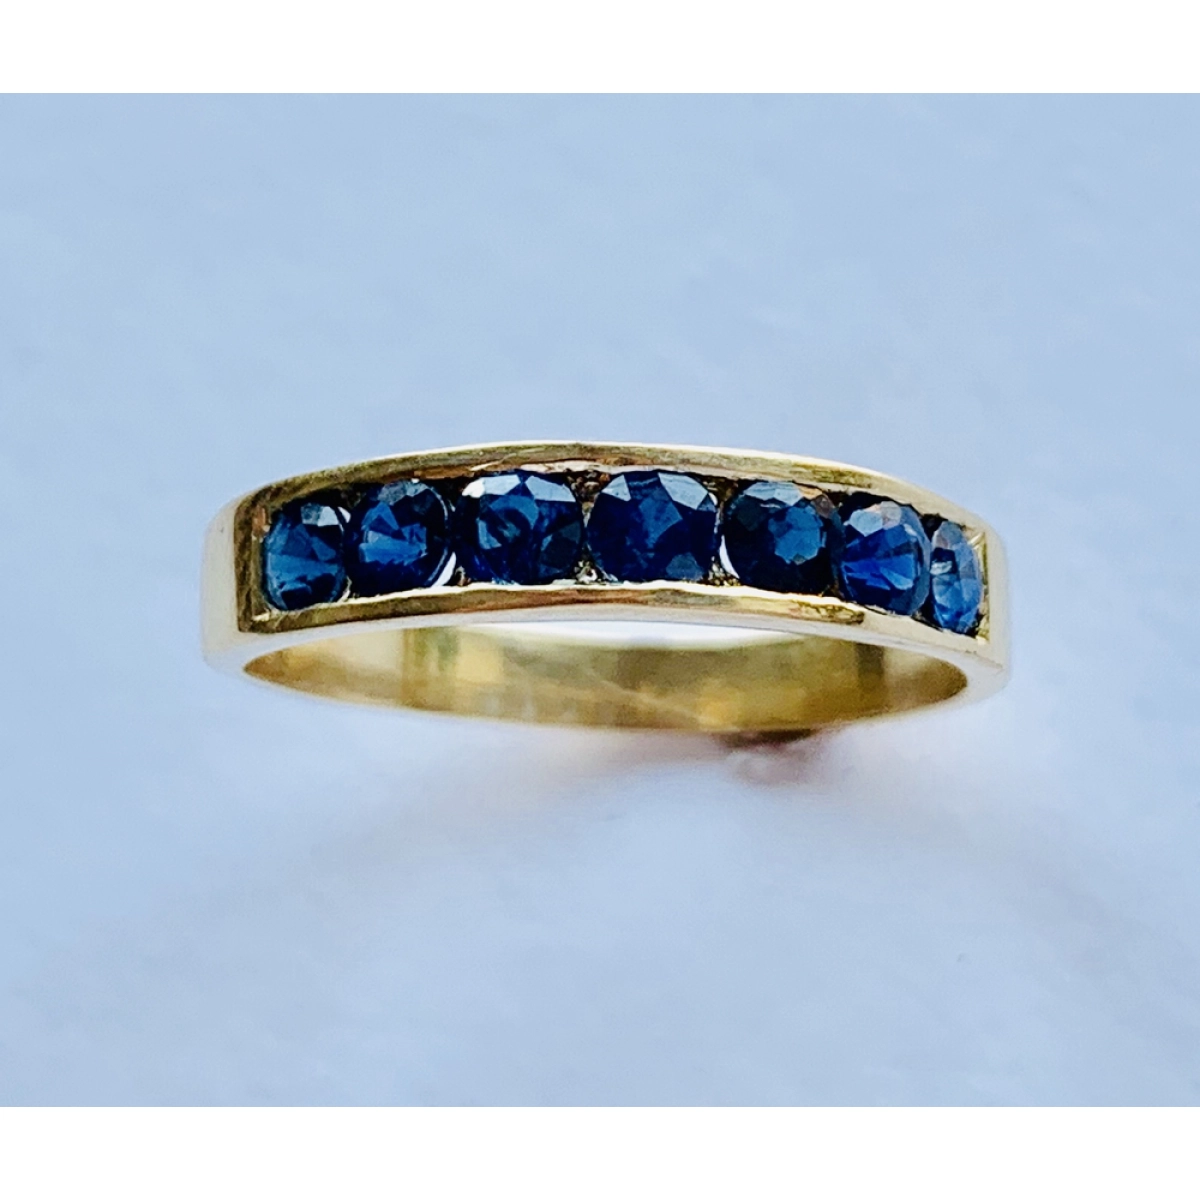 RING WITH SAPPHIRES IN 18K GOLD